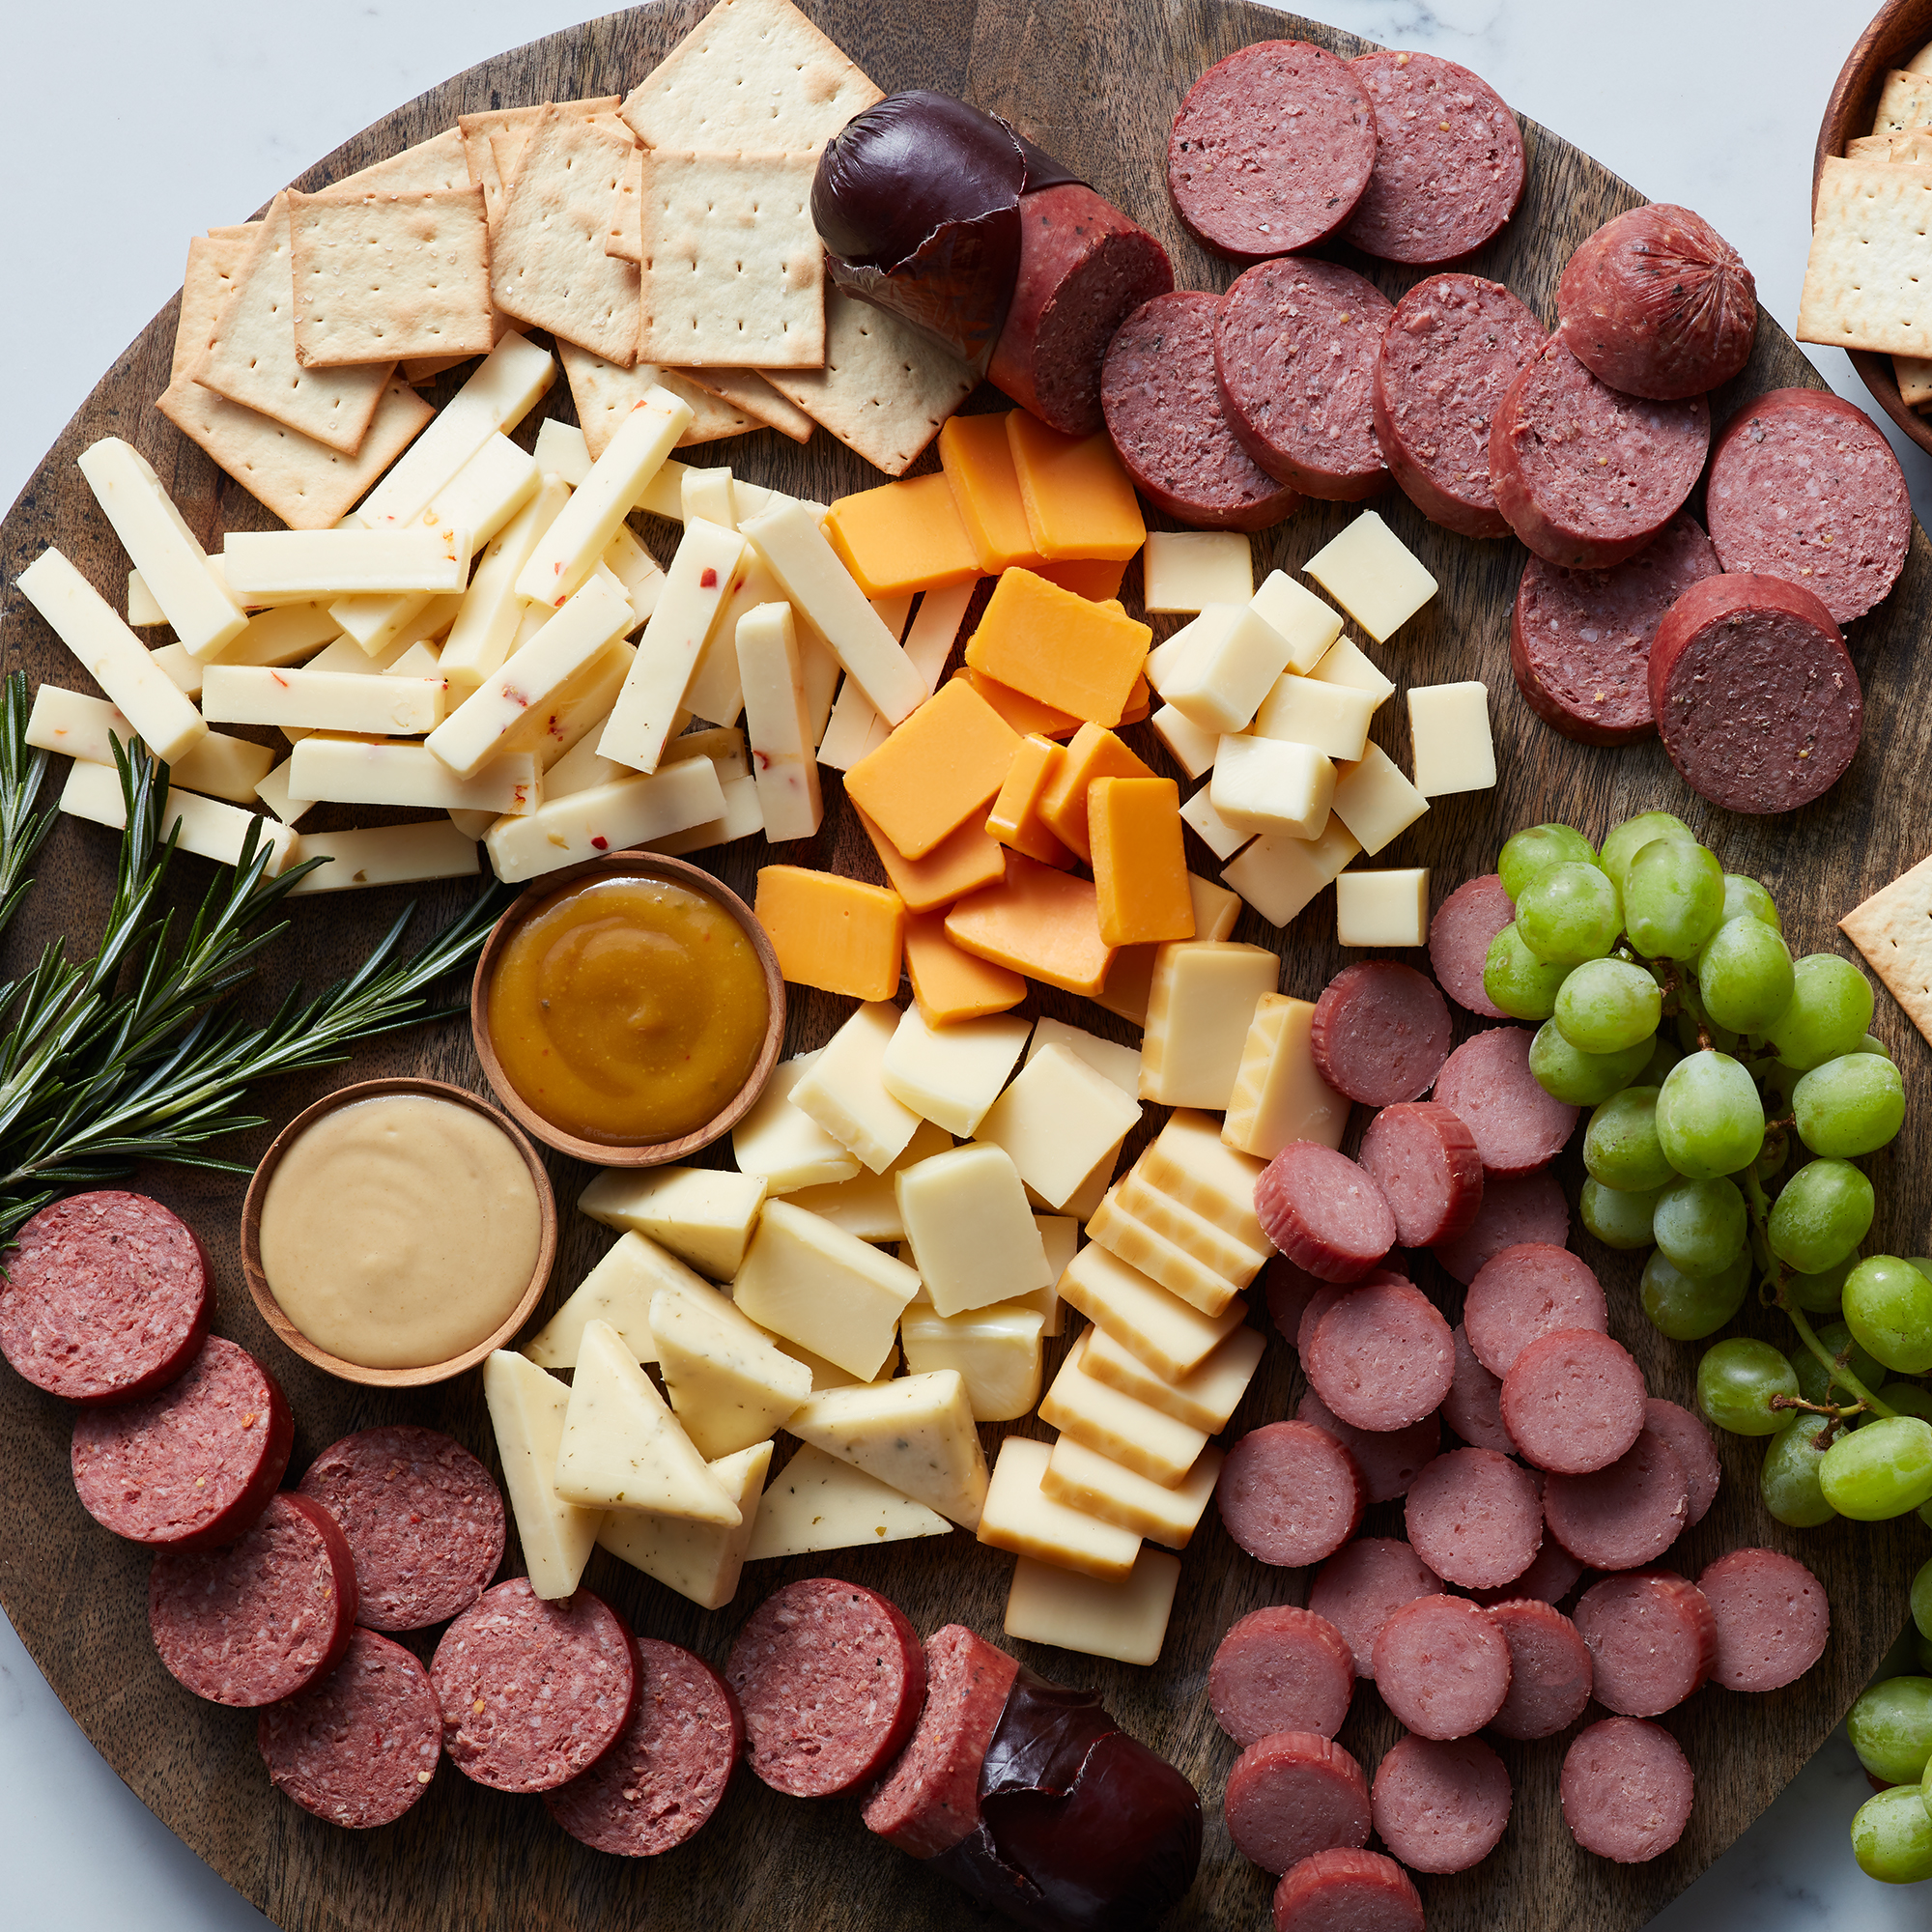 Hickory Farms Snack Platter Sliced Beef, Summer Sausage, Pepperoni &  Cheeses, Mustard & Crackers, Trays, Baskets & Platters